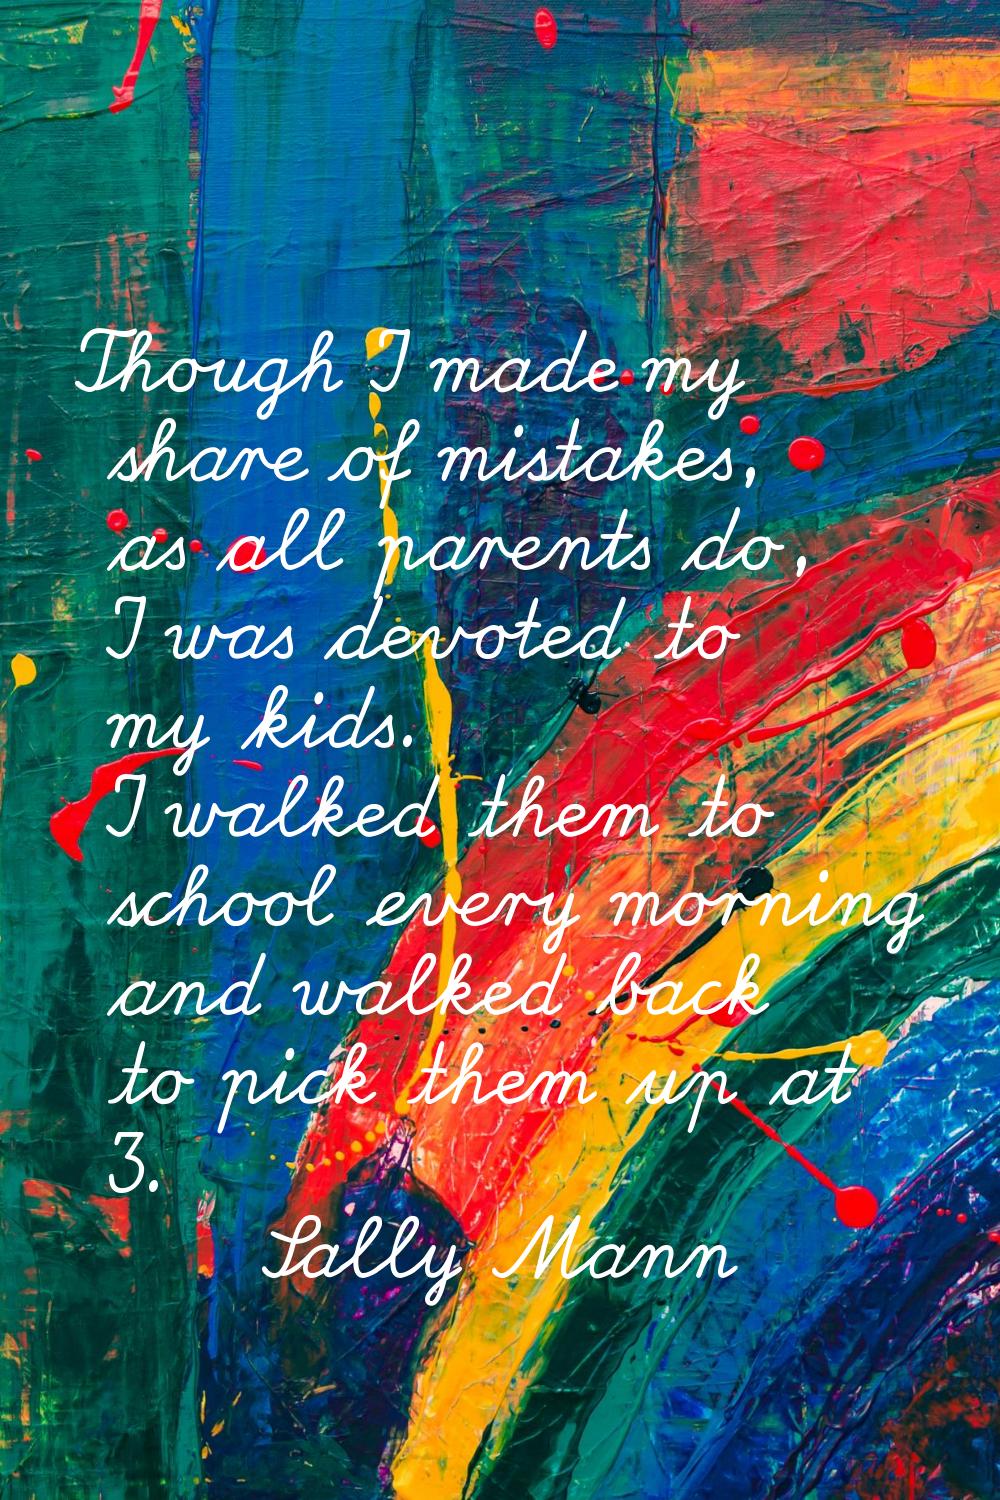 Though I made my share of mistakes, as all parents do, I was devoted to my kids. I walked them to s